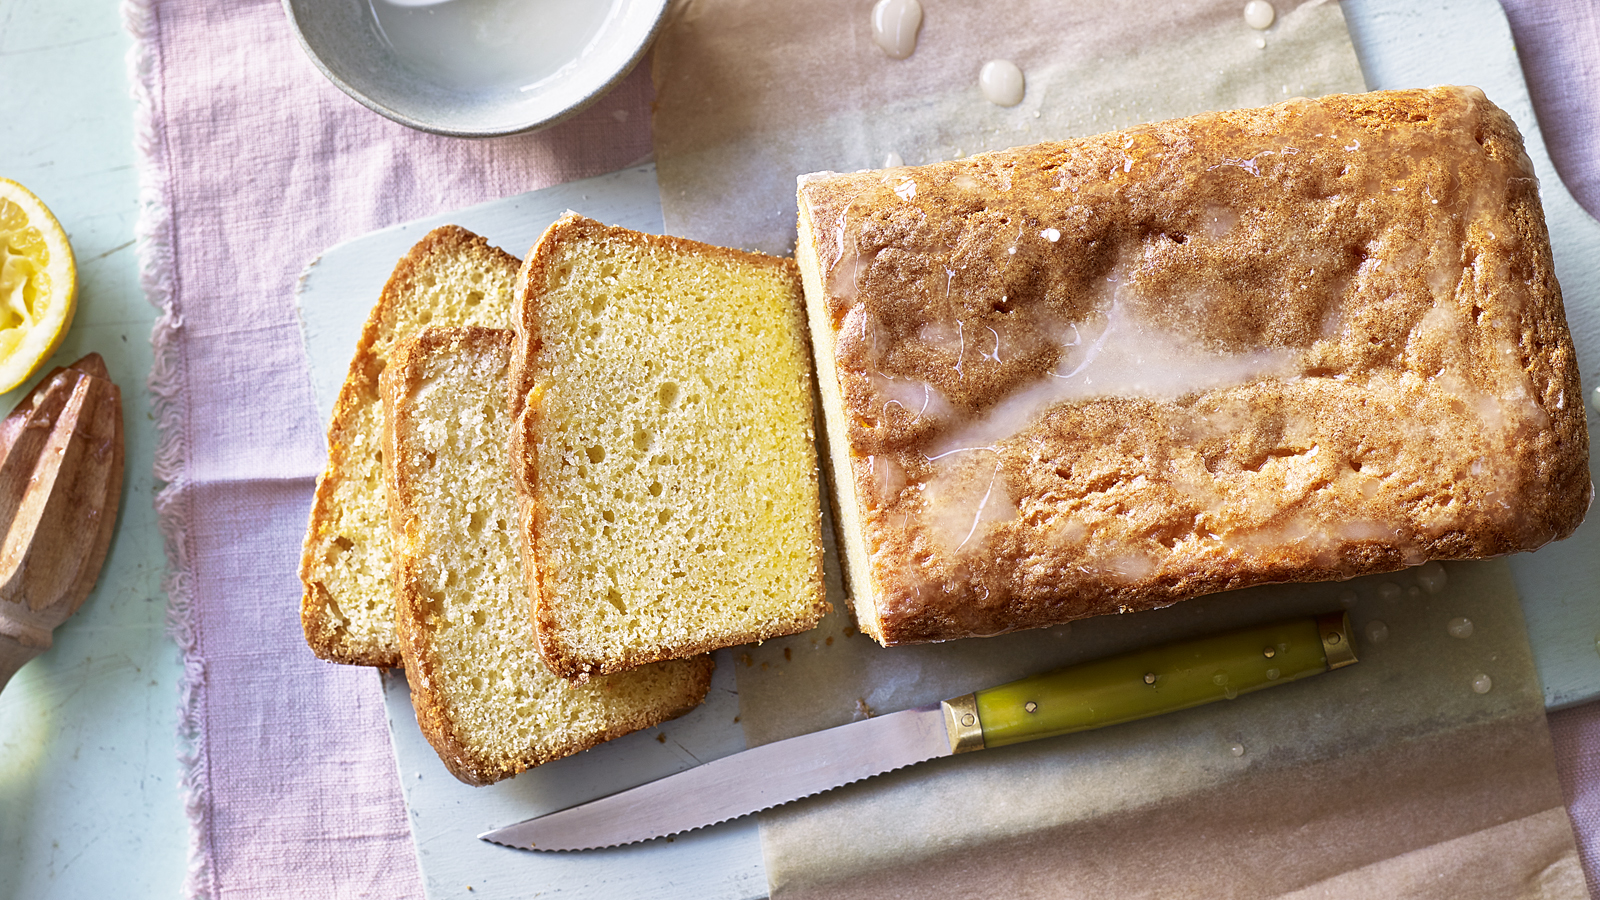 https://food-images.files.bbci.co.uk/food/recipes/easy_lemon_drizzle_cake_78533_16x9.jpg